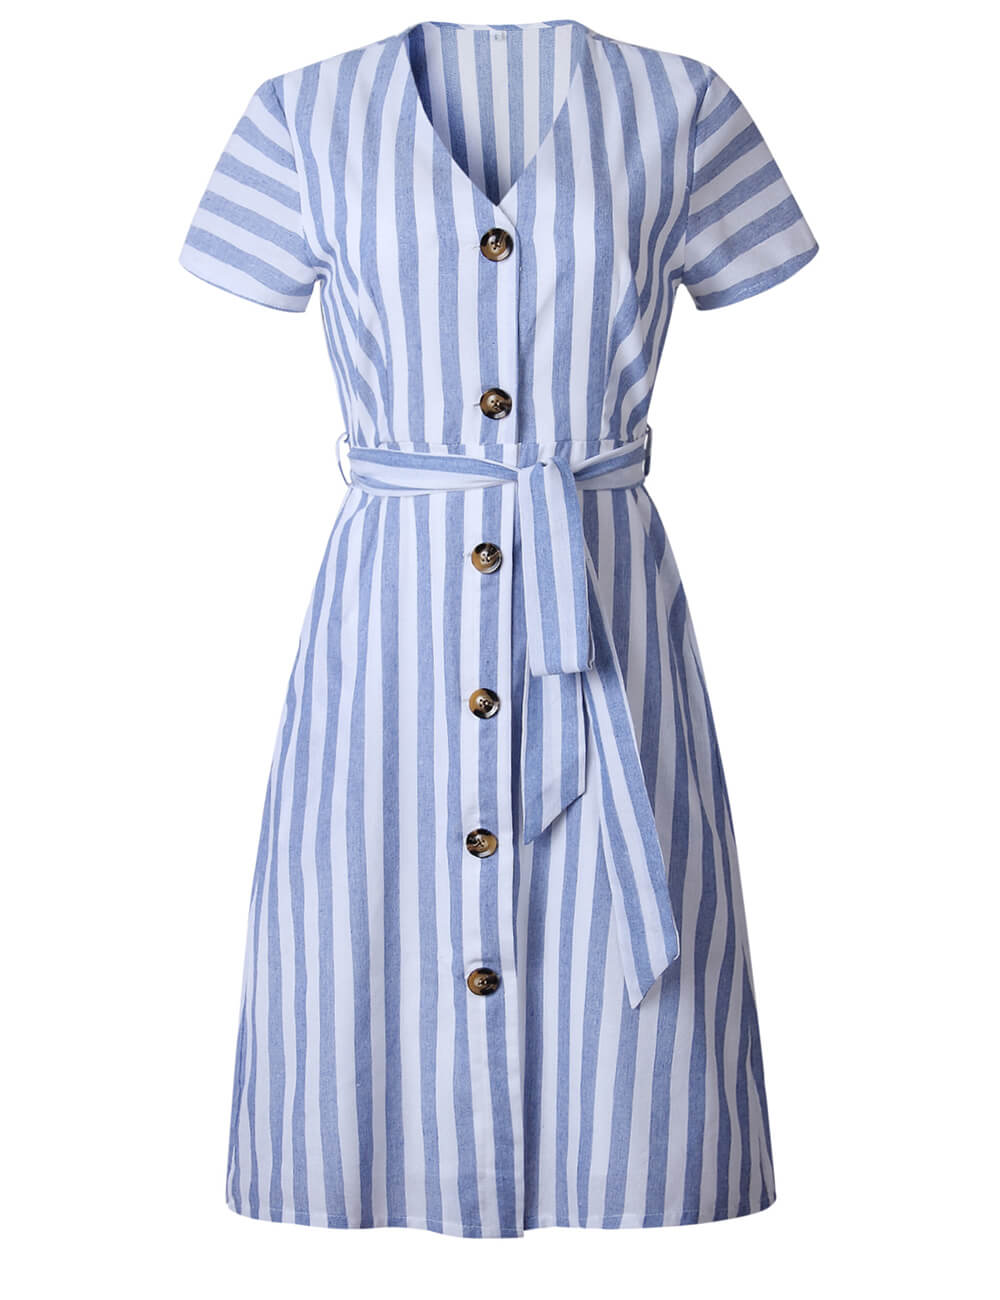 Summer Short Sleeve Striped Midi Dress V Neck Bow Tie Button Down Belted Swing Dresses With Pockets